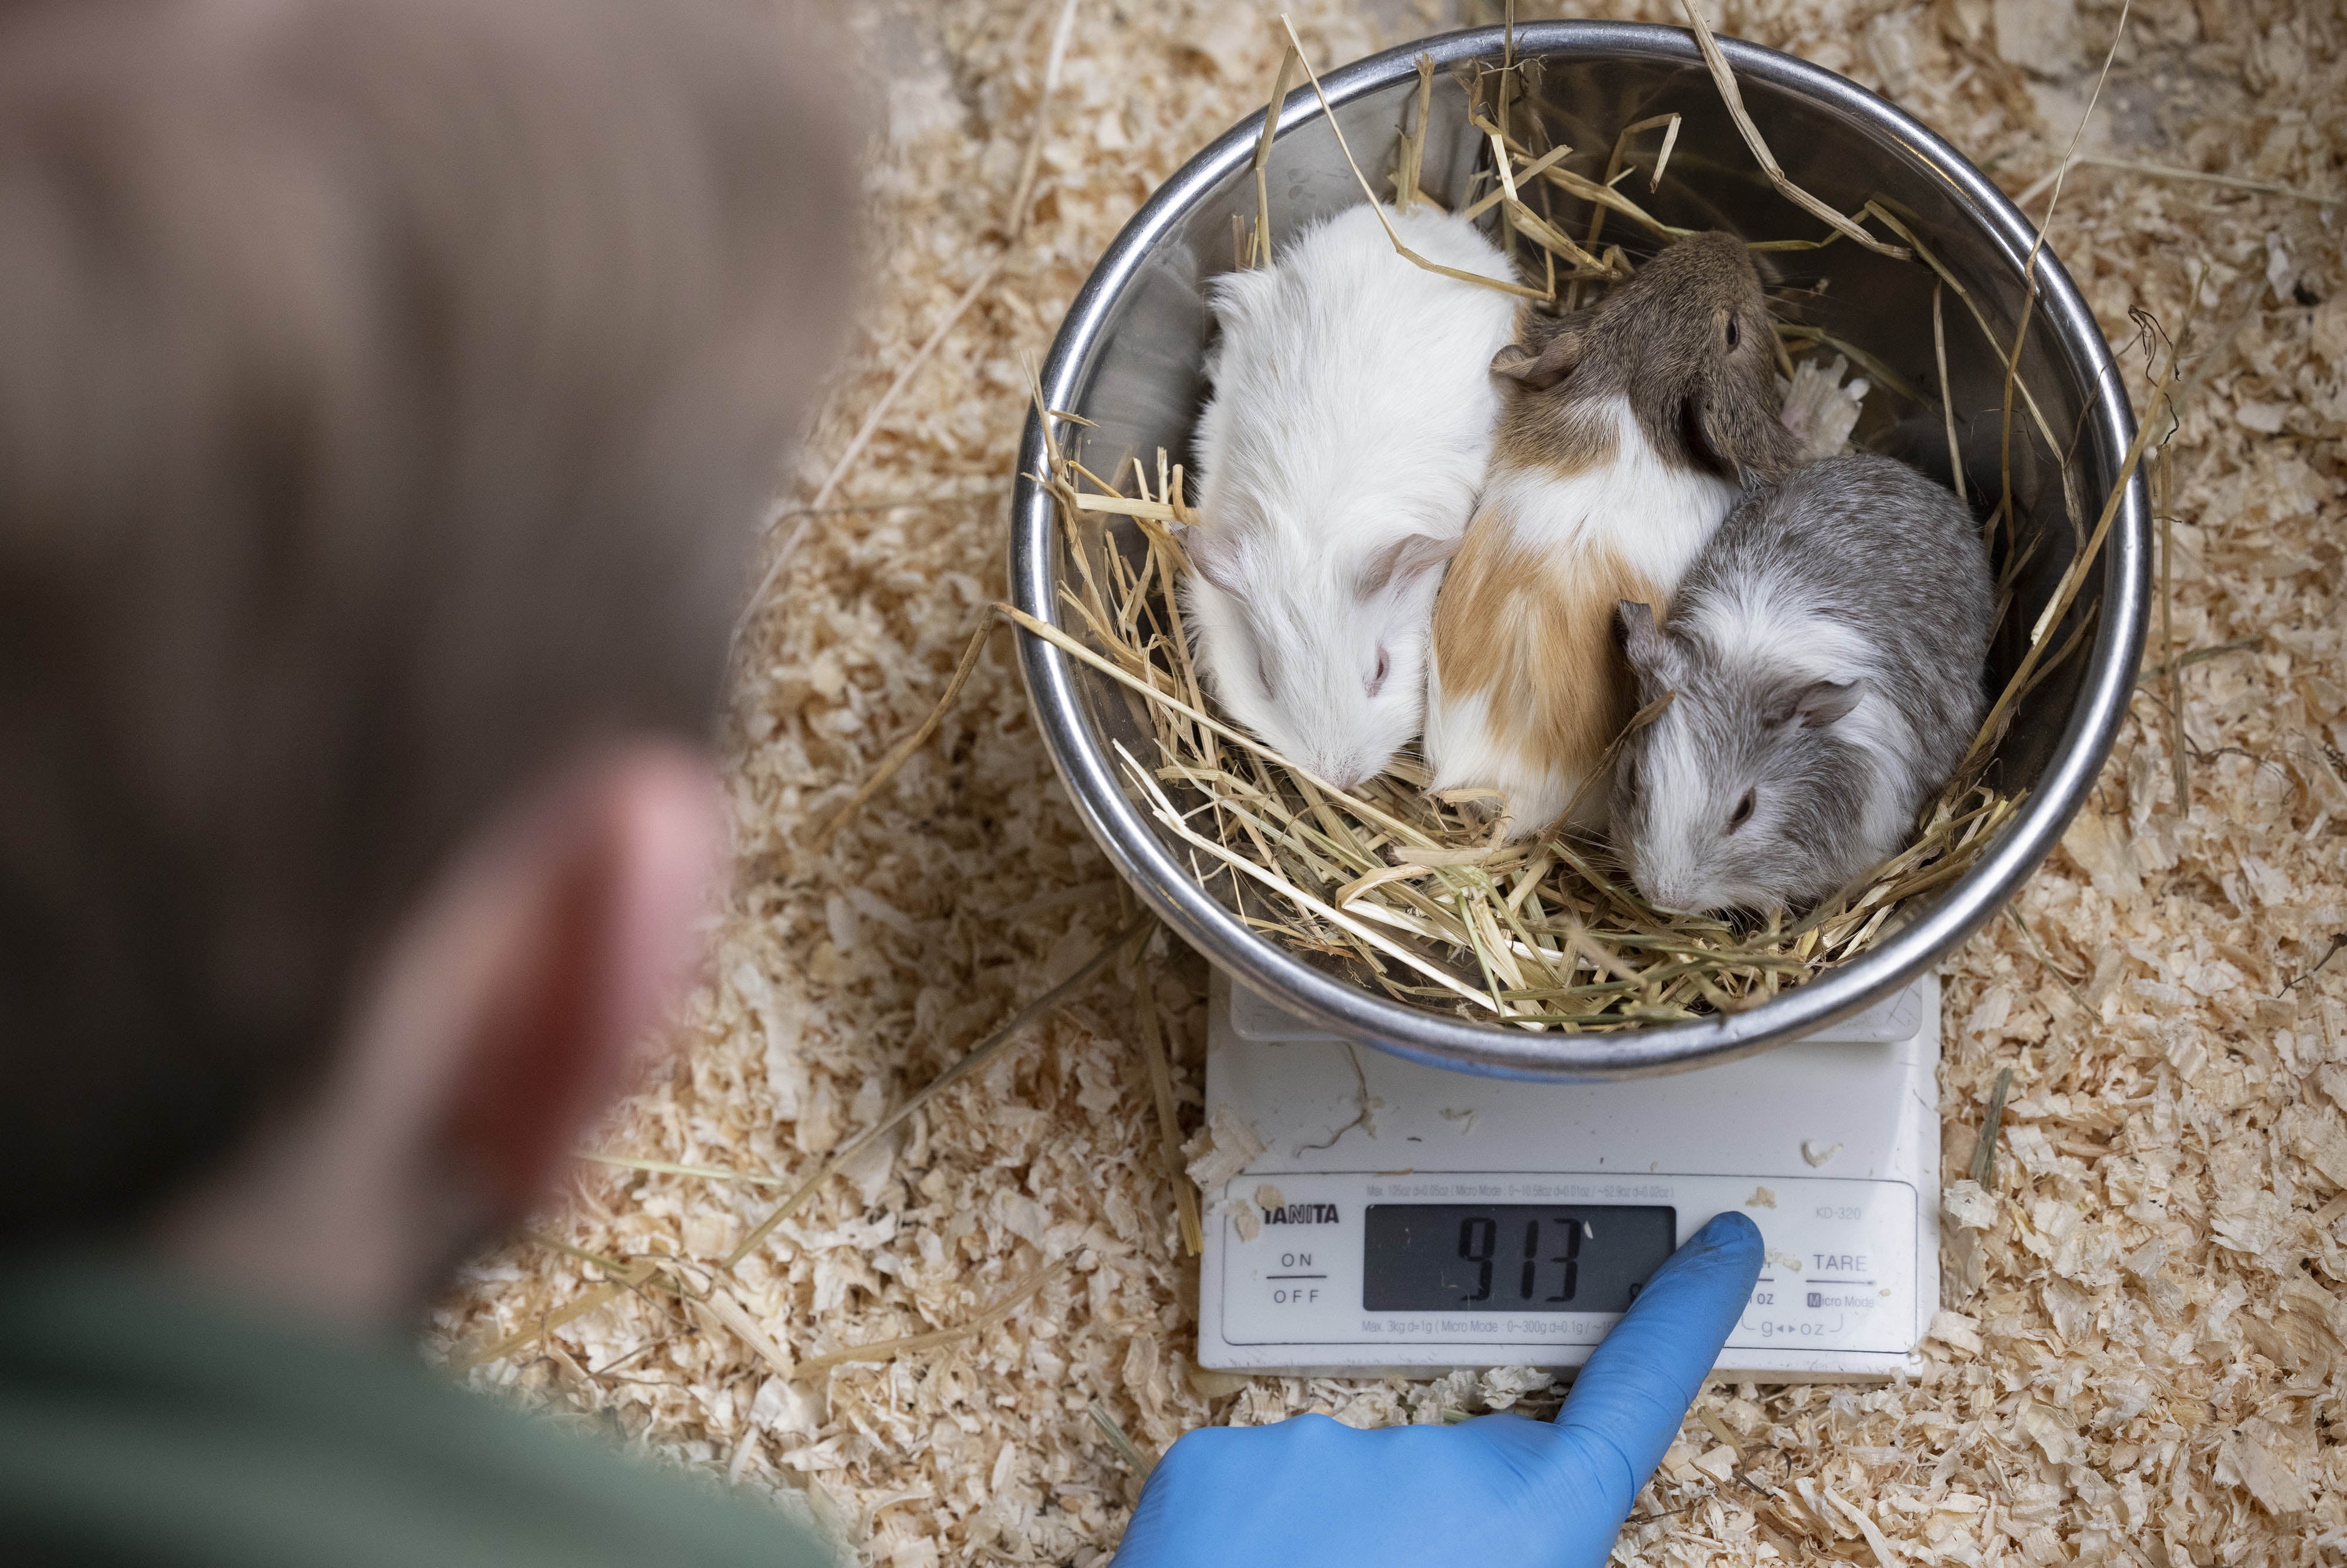 Guinea pigs are weighed during the annual animal health check at Chessington World of Adventures Resort in Surrey